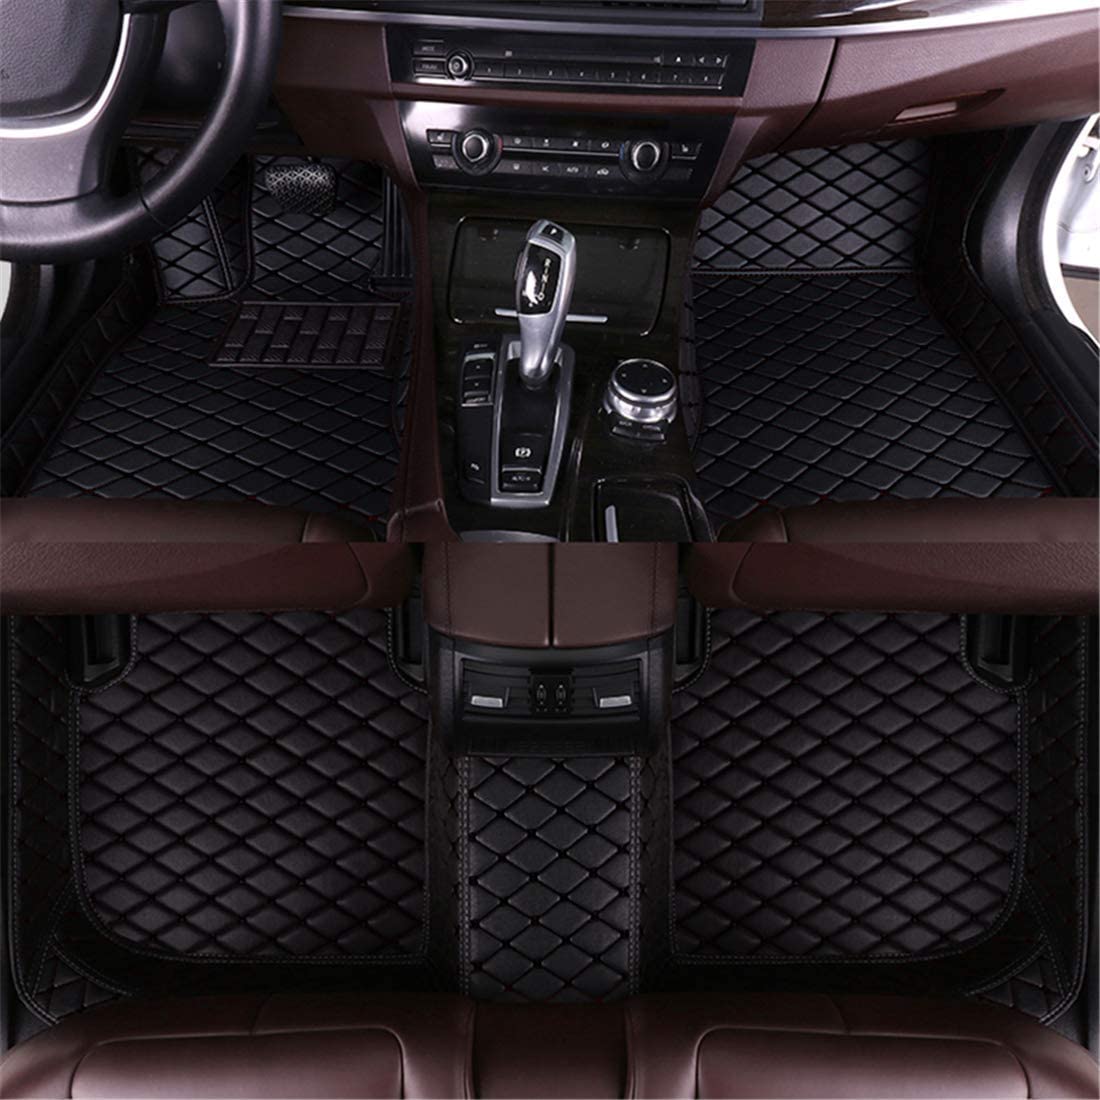 Car Floor Mats fit for Jaguar S-Type 2000-2007 Full Coverage All Weather Protection Non-Slip Leather Floor Liners